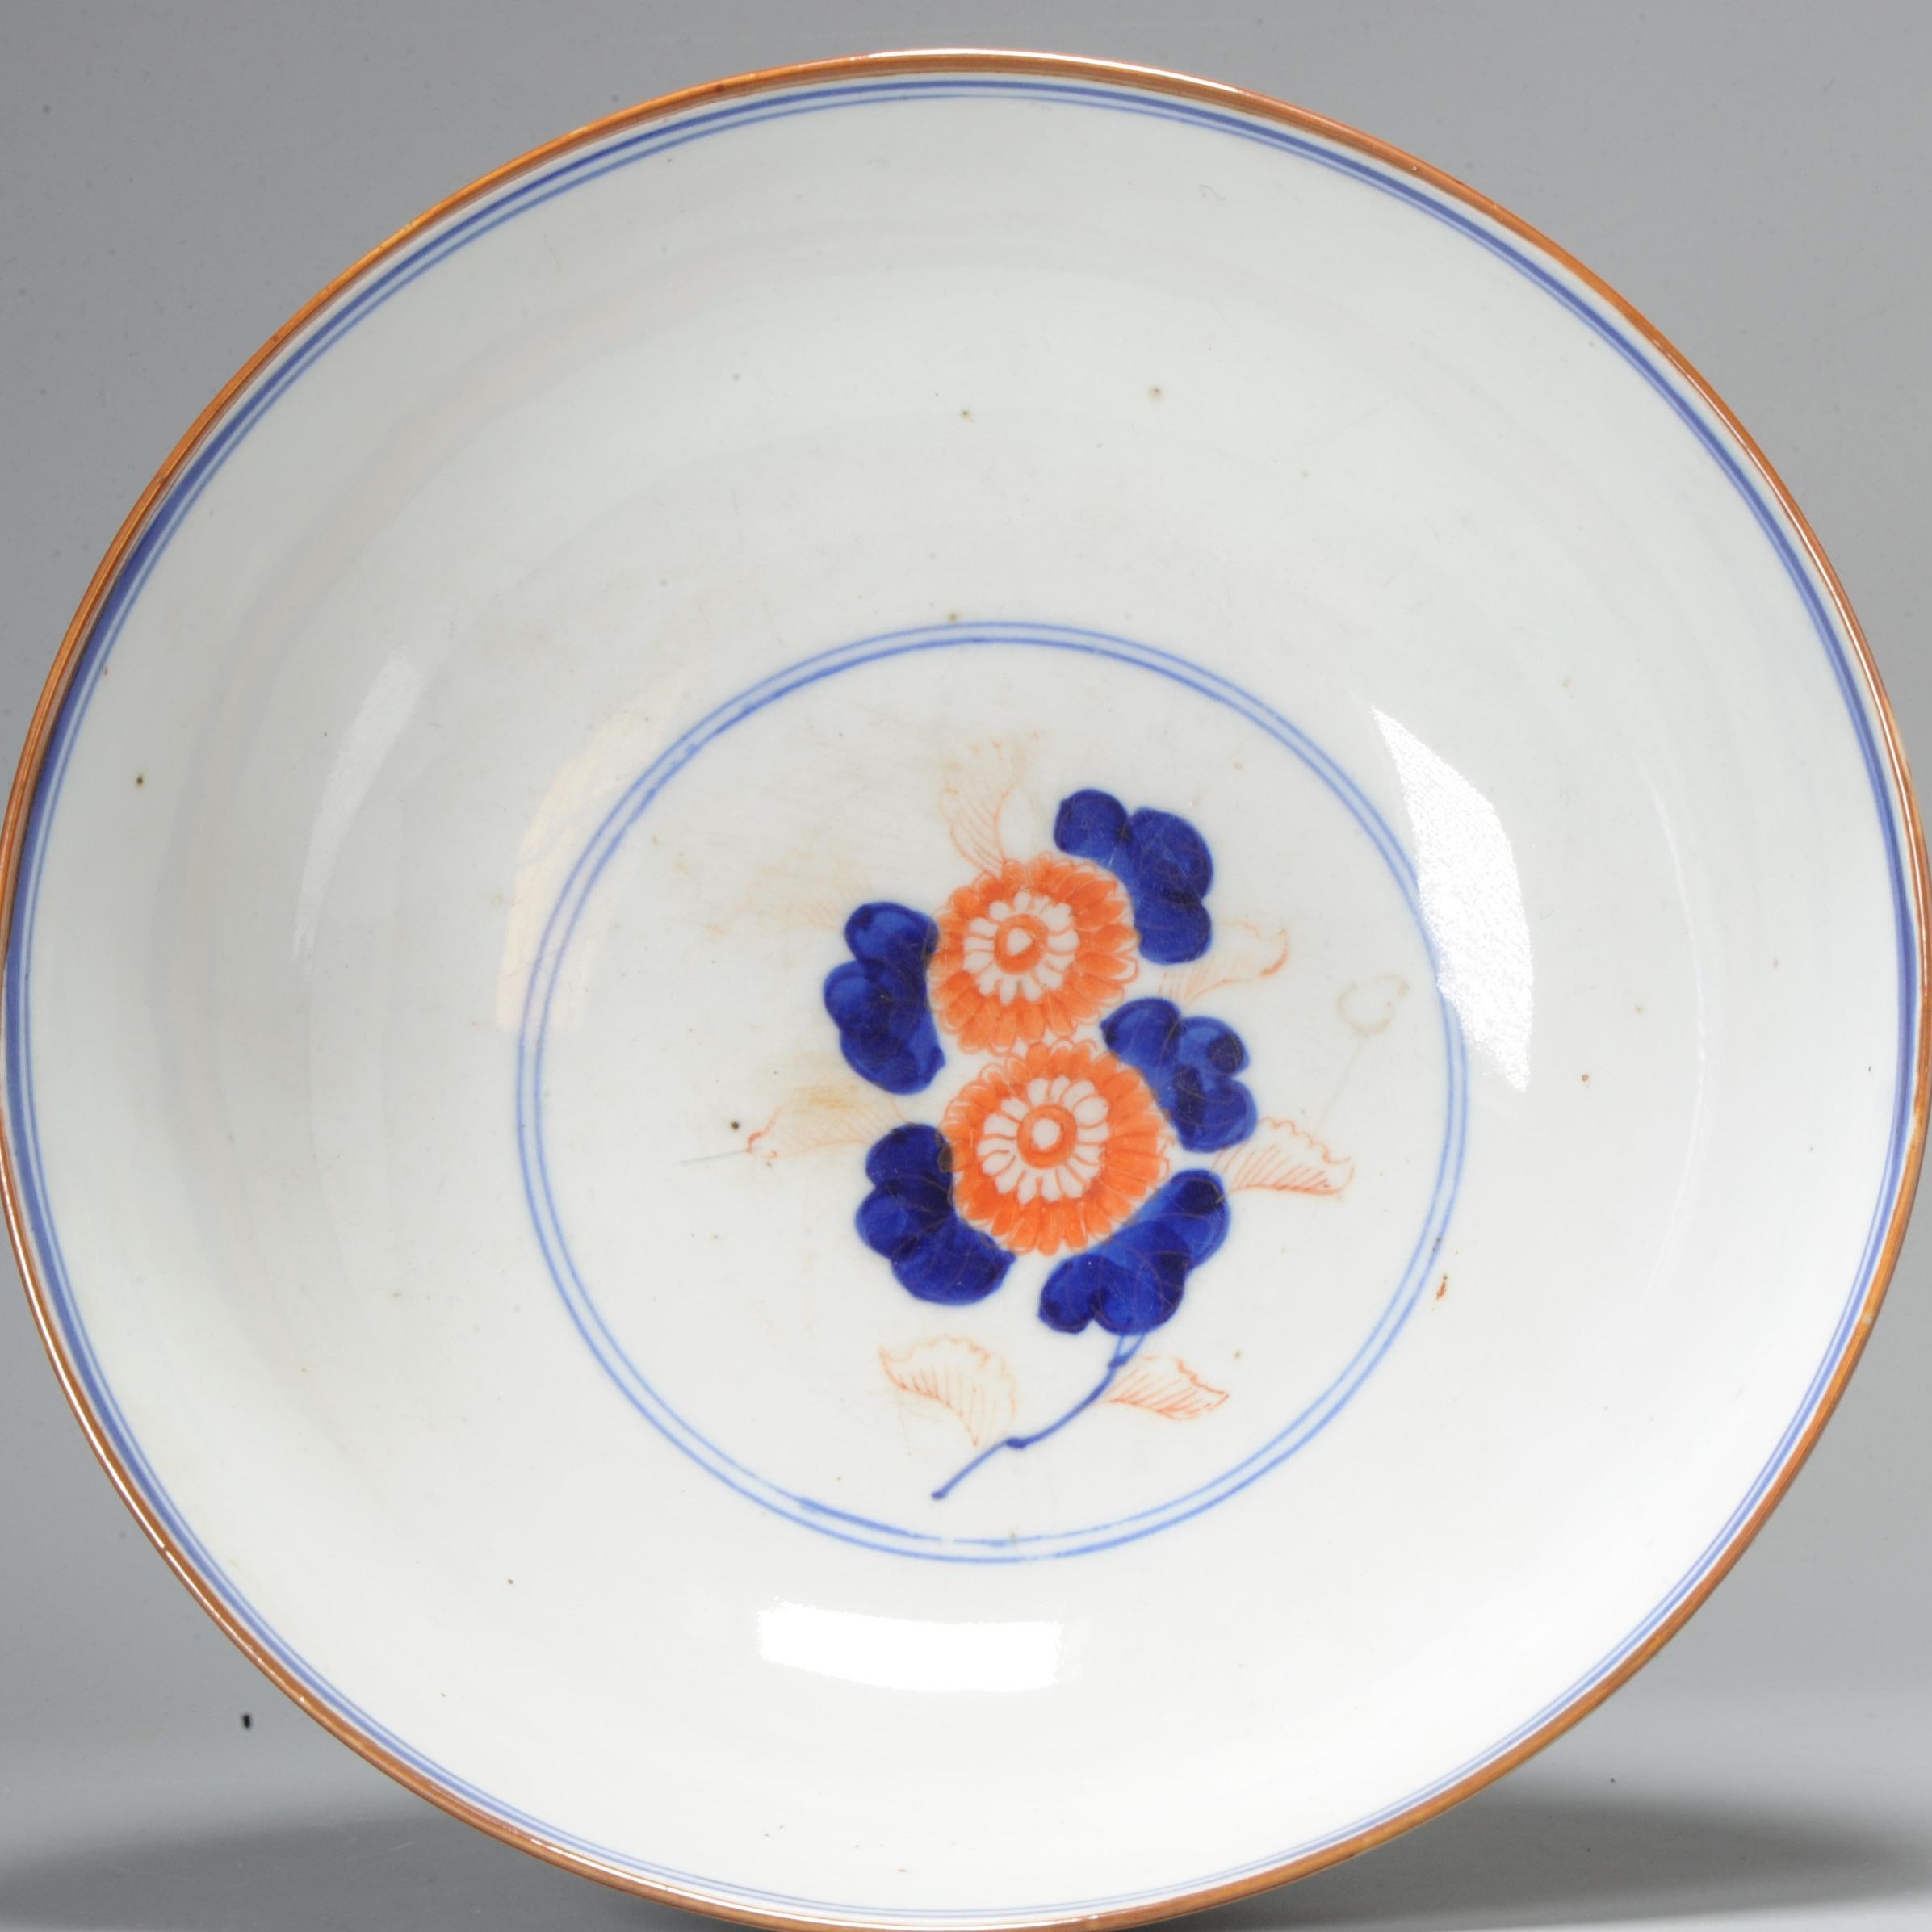 A Beautiful and Large Japanese Porcelain Imari Bowl Japan Antique, 19th Century In Good Condition For Sale In Amsterdam, Noord Holland